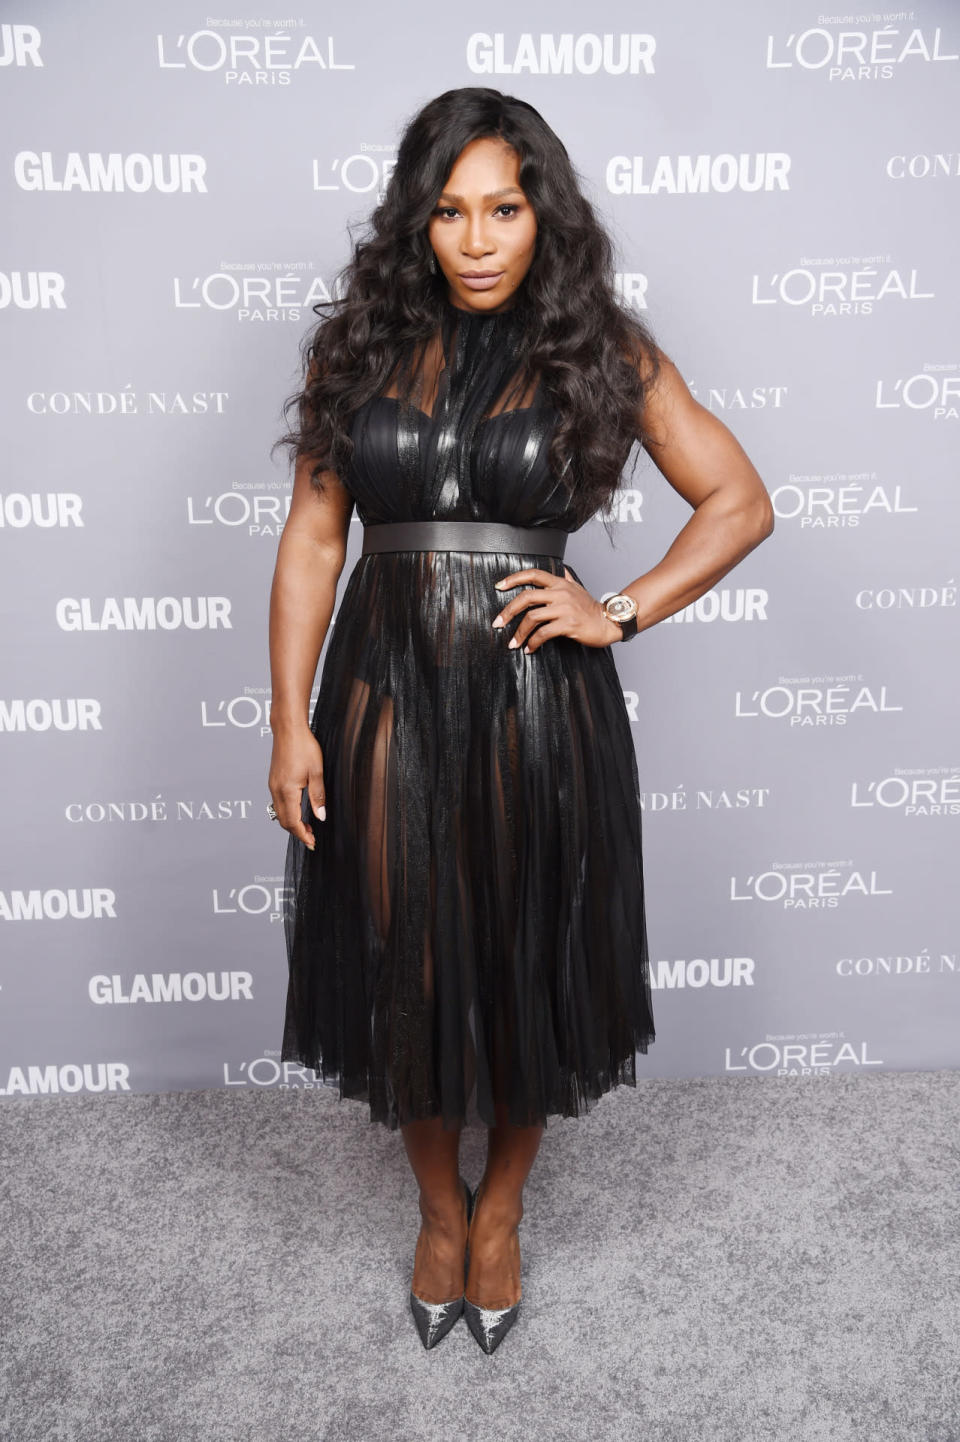 Serena Williams in a black sheer dress at the 2015 Glamour Women Of The Year Awards.